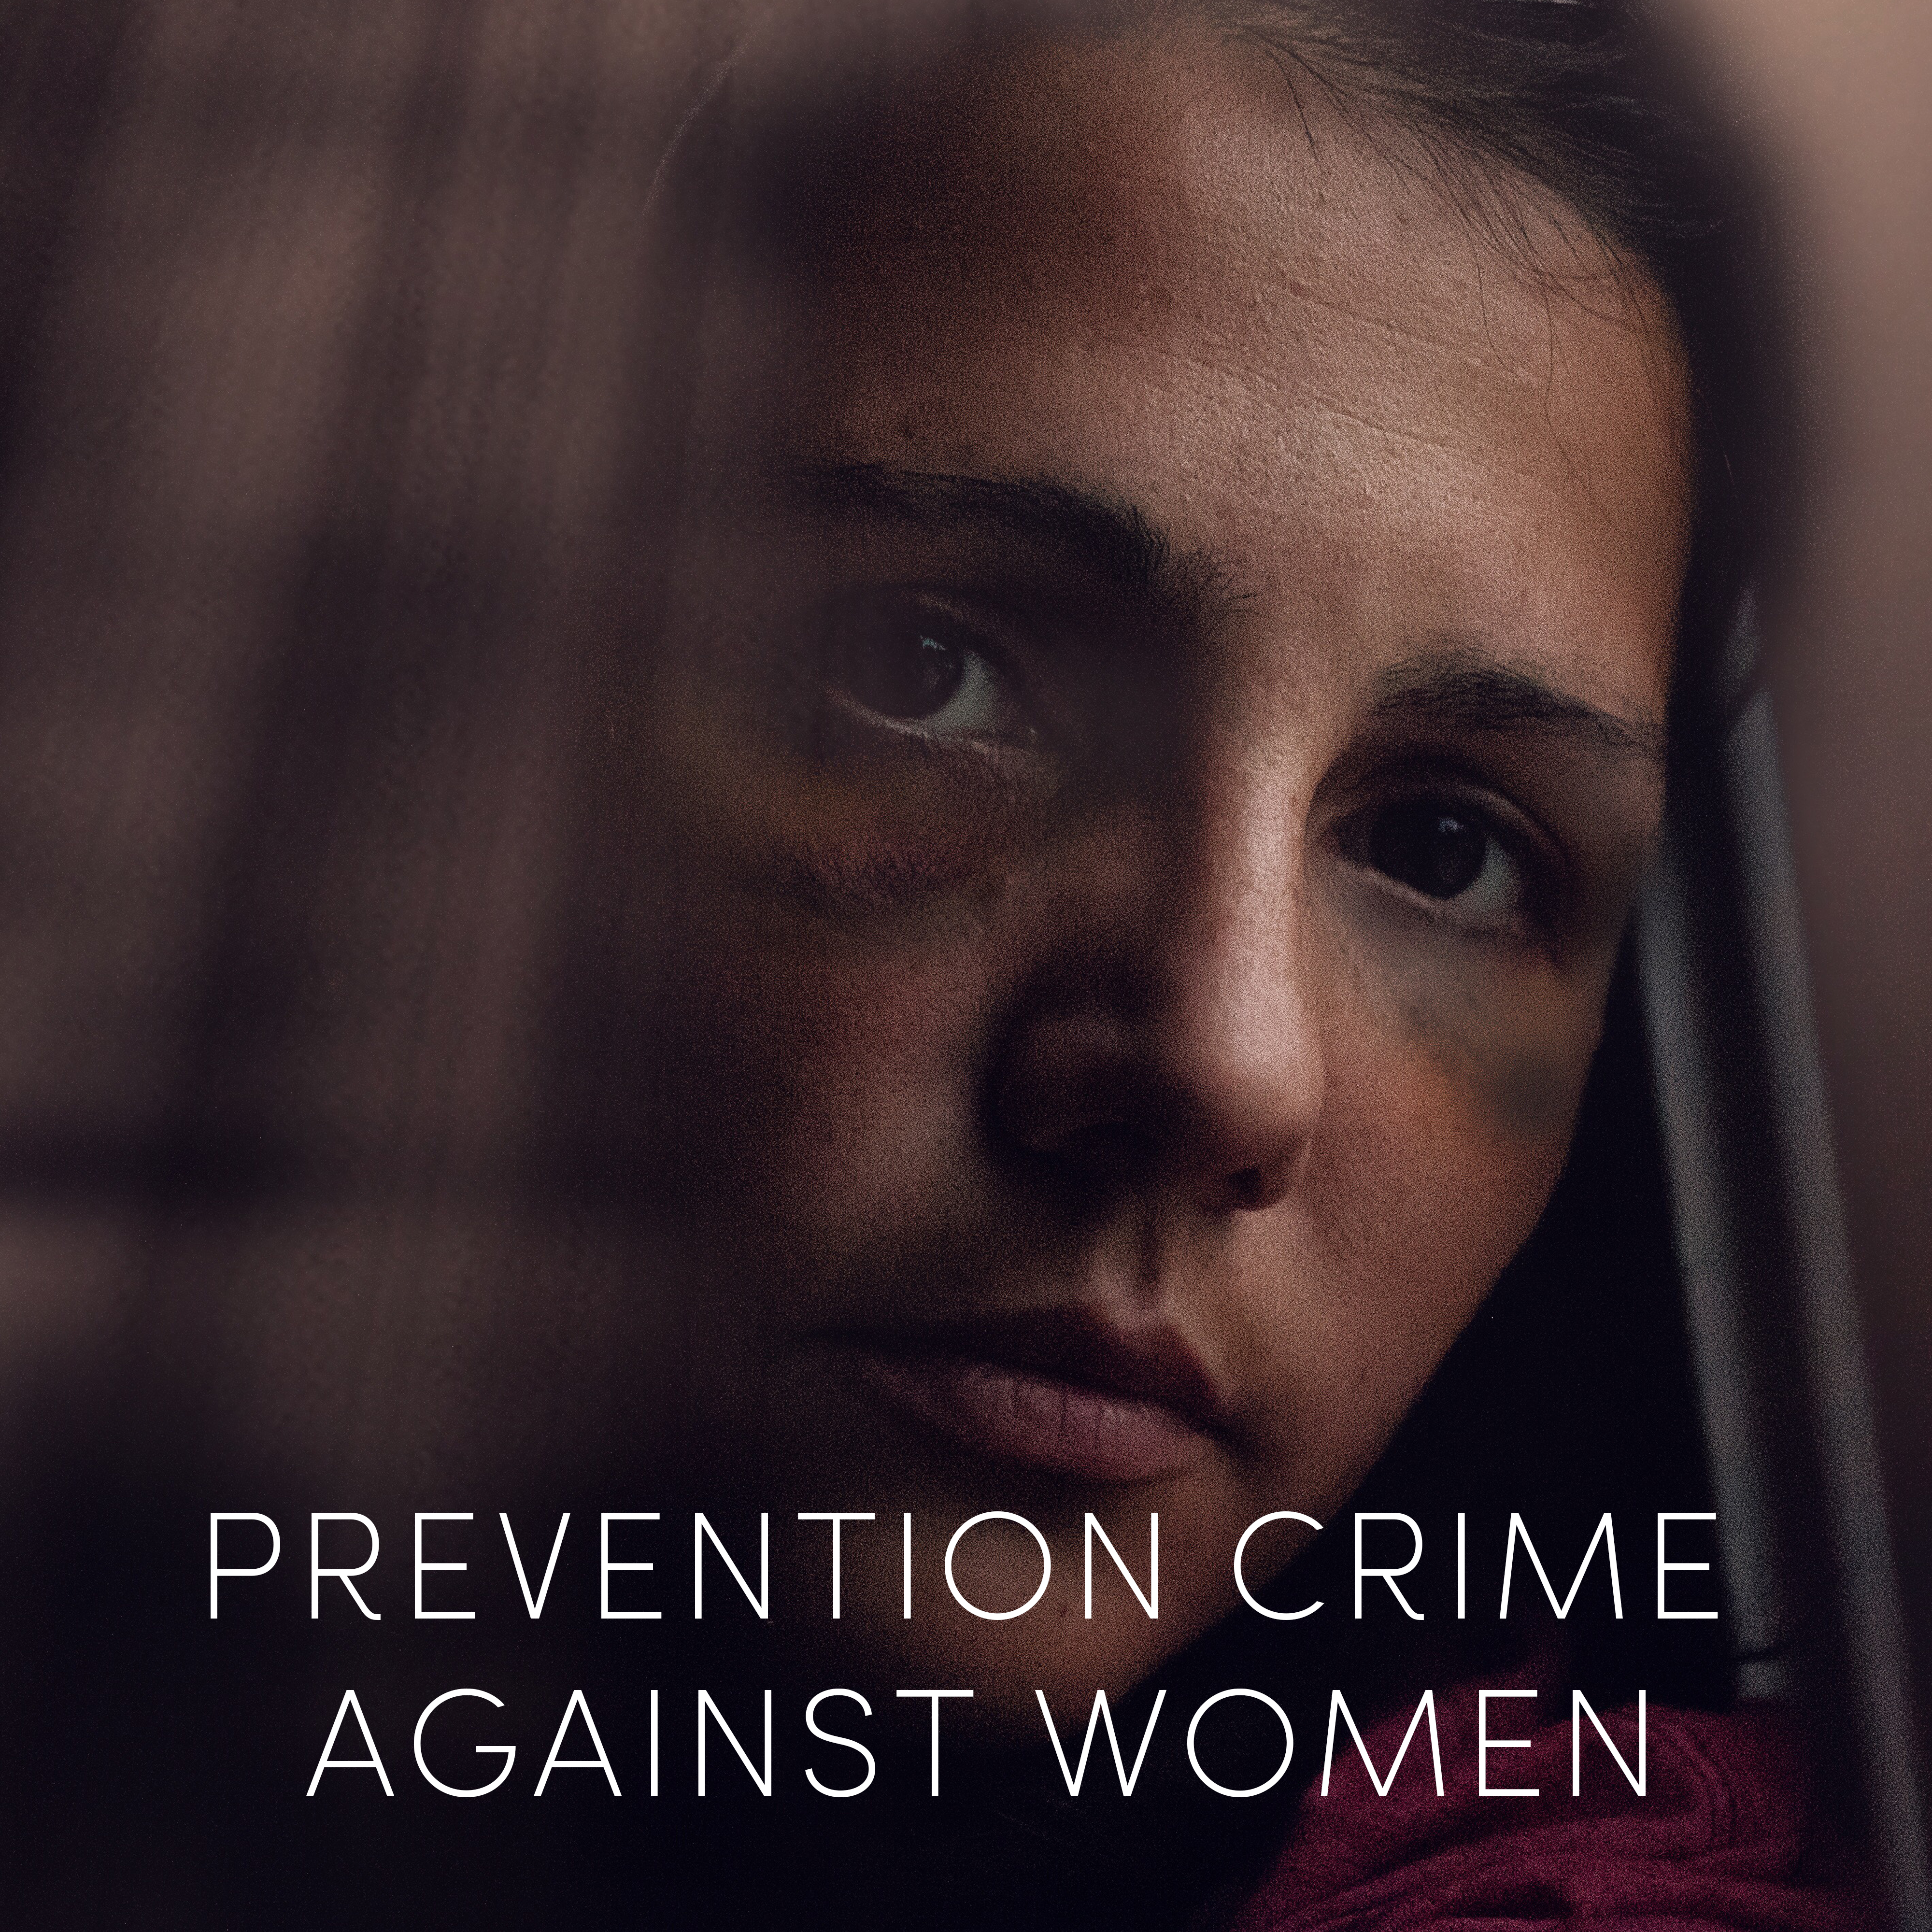 Cantabae Education & Welfare Society has been actively involved to prevent and ending violence against women.